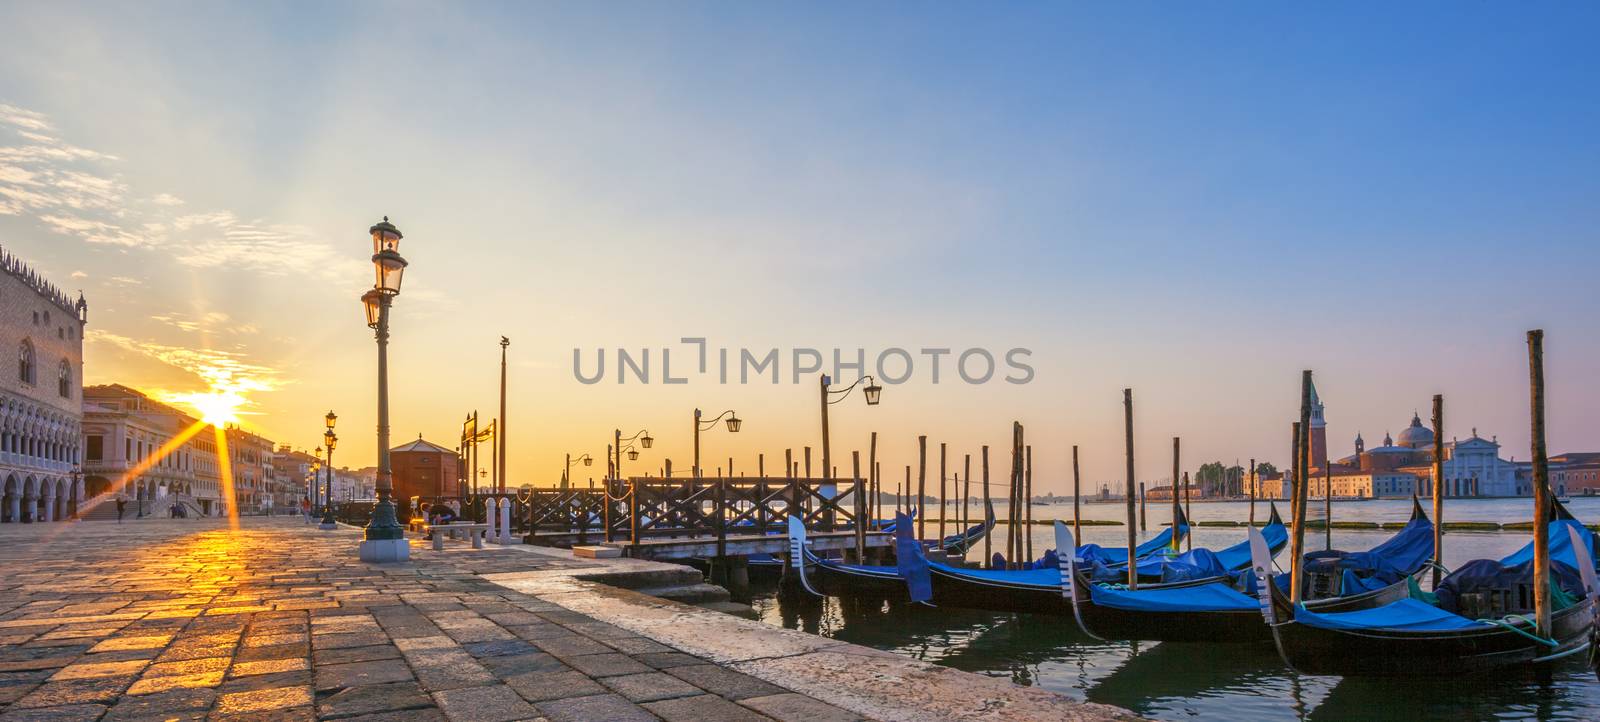 View of Venice with gondolas at sunrise by vwalakte